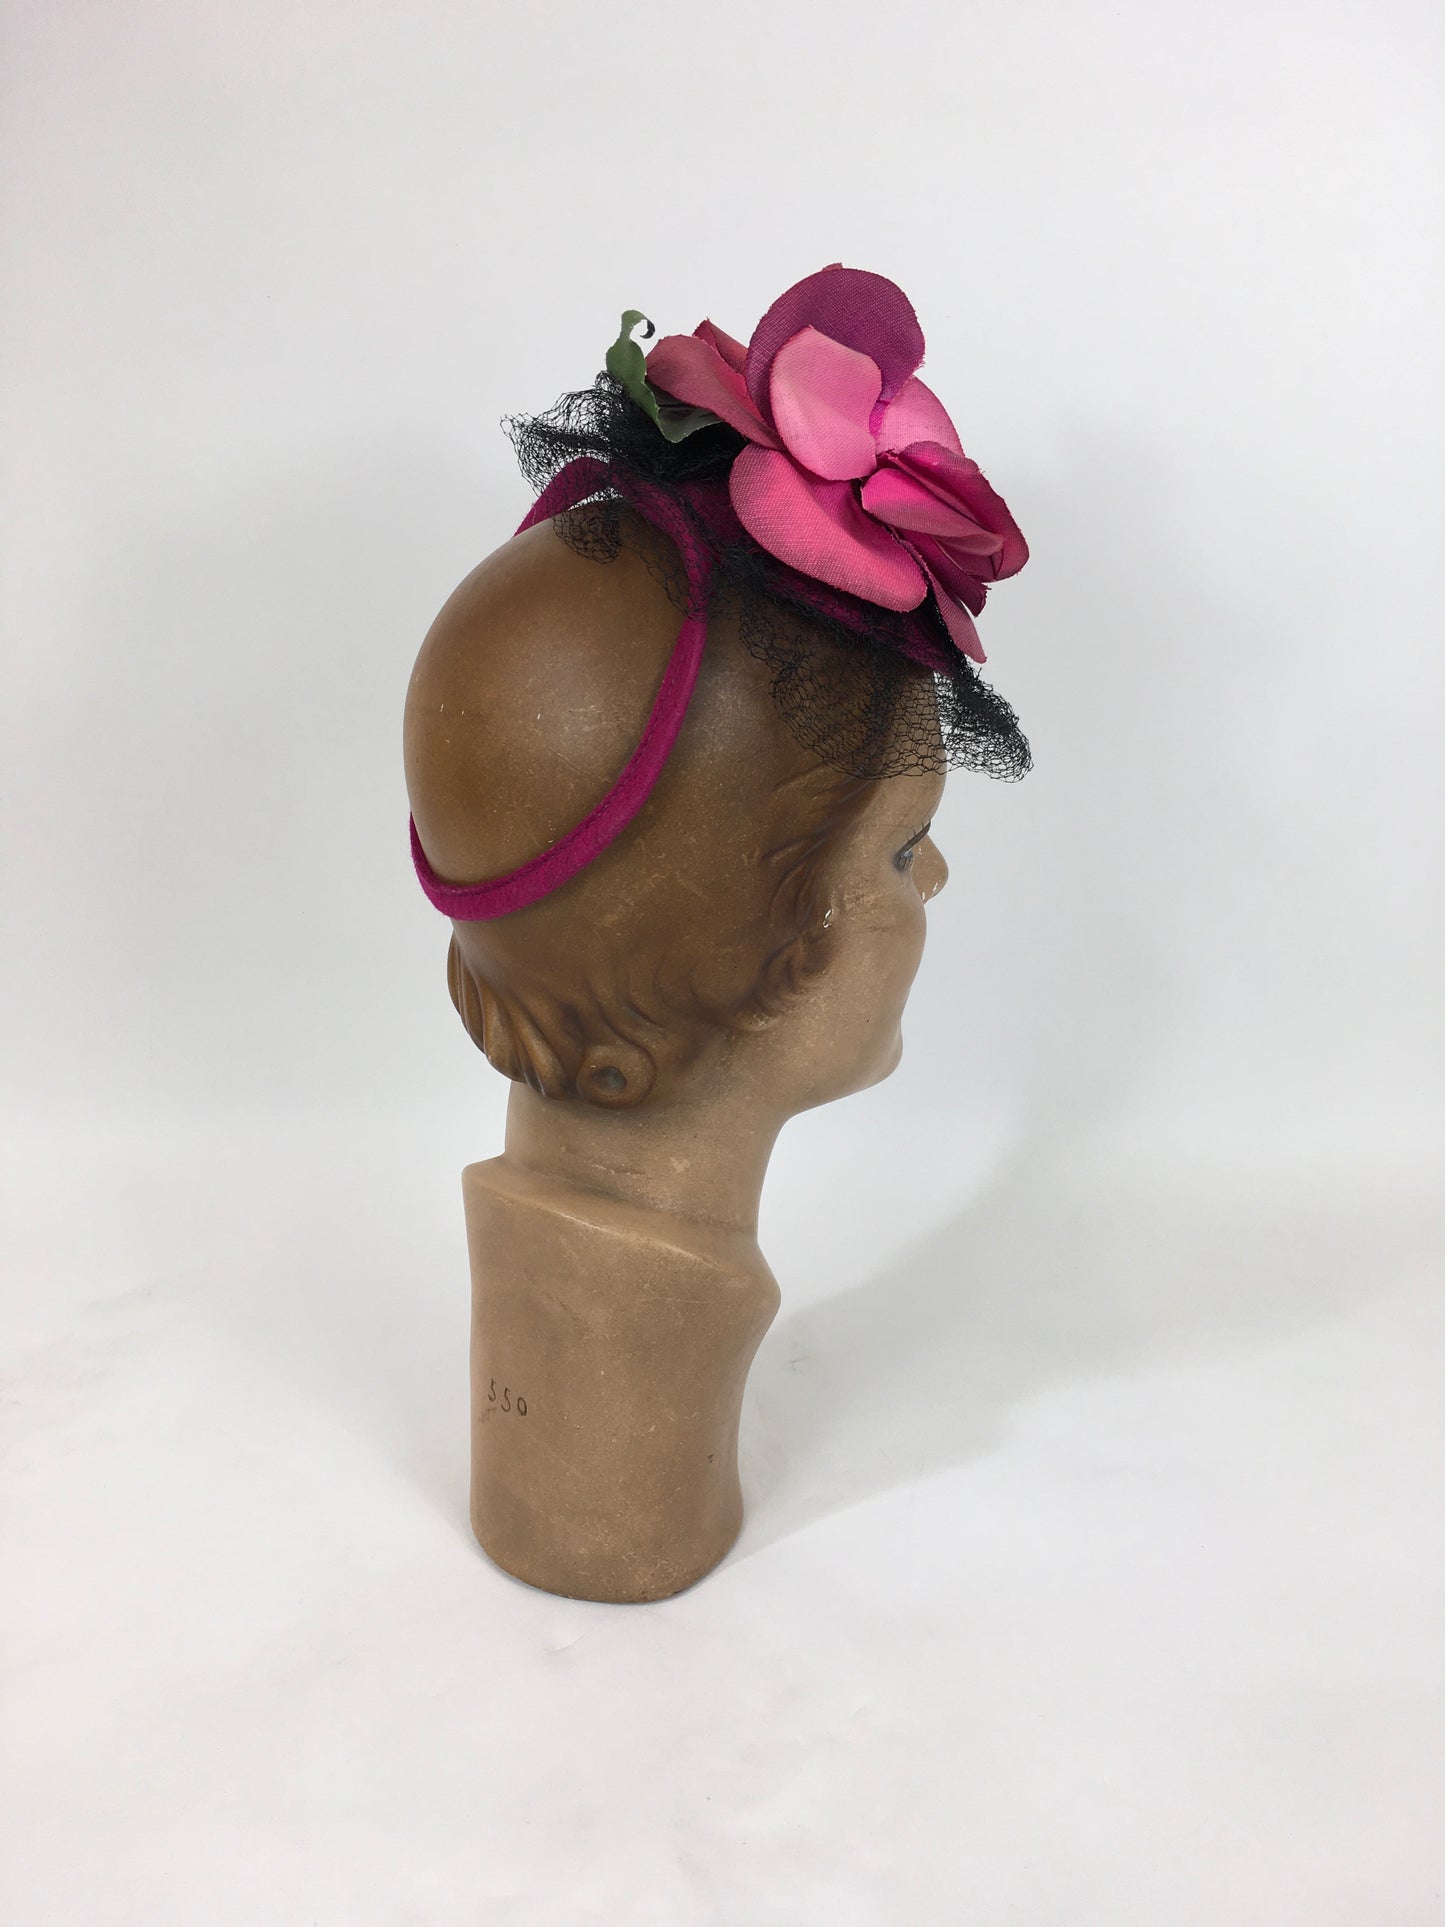 Original 1940’s Stunning Toy Topper Tilt Hat - In Cerise Pink with Floral Millinery and Veiling